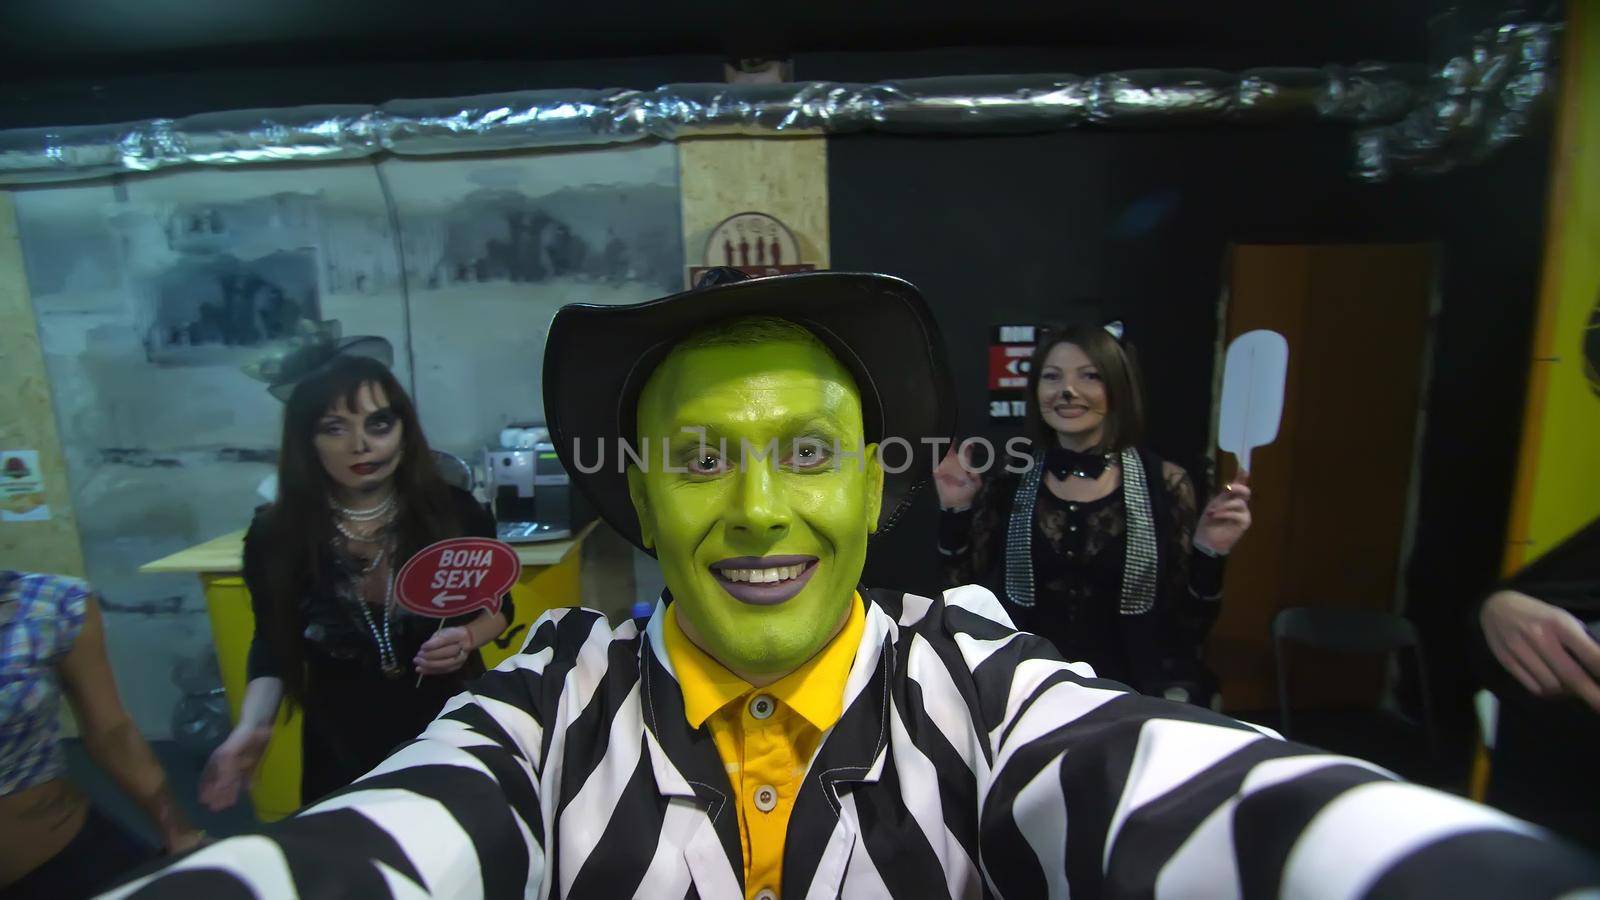 Halloween party, night, portrait of a man with a green face, wearing a hat, with a terrible makeup , croaks in front of the camera, in the background Halloween scenery is seen. High quality photo